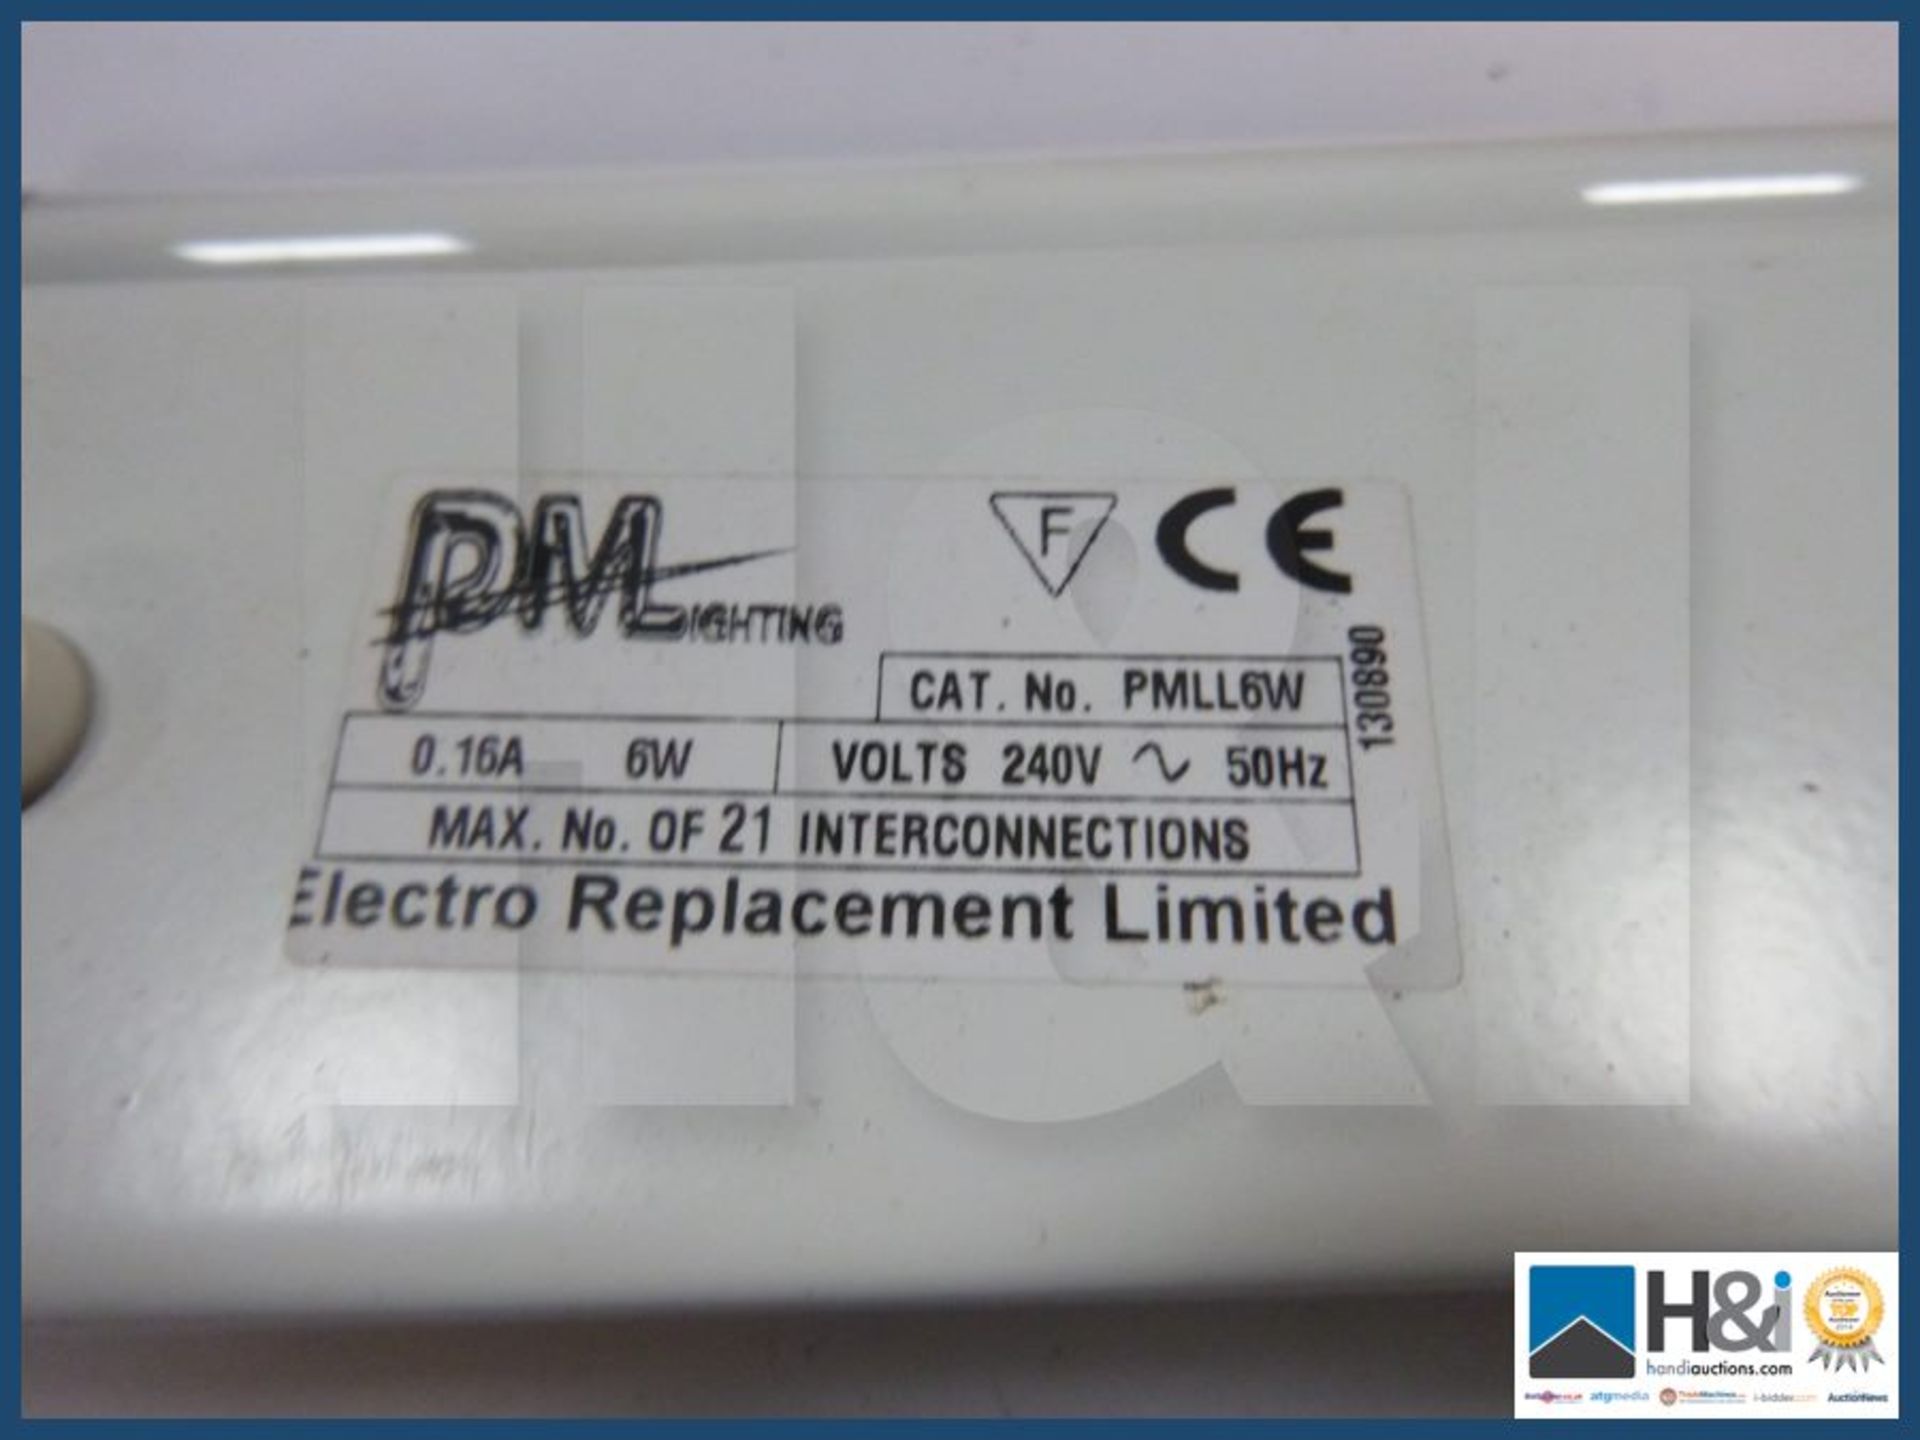 X5 Modular fluorescent light fitting. 240V/50Hz / 6w with mains leads. - Image 3 of 3